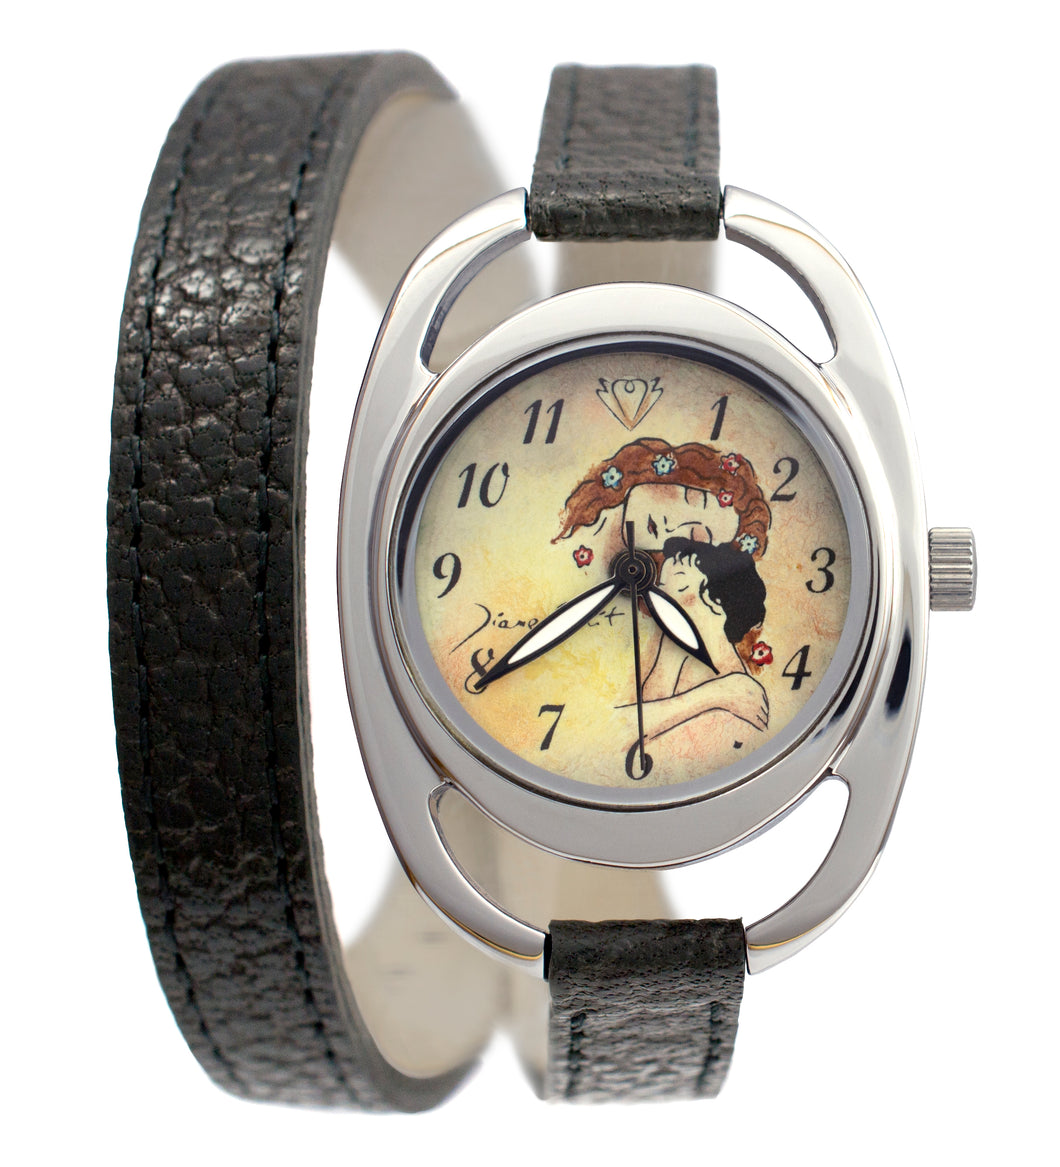 Artistic Women's Watch with Double Leather Strap | KLIMT'S MOTHER AND CHILD